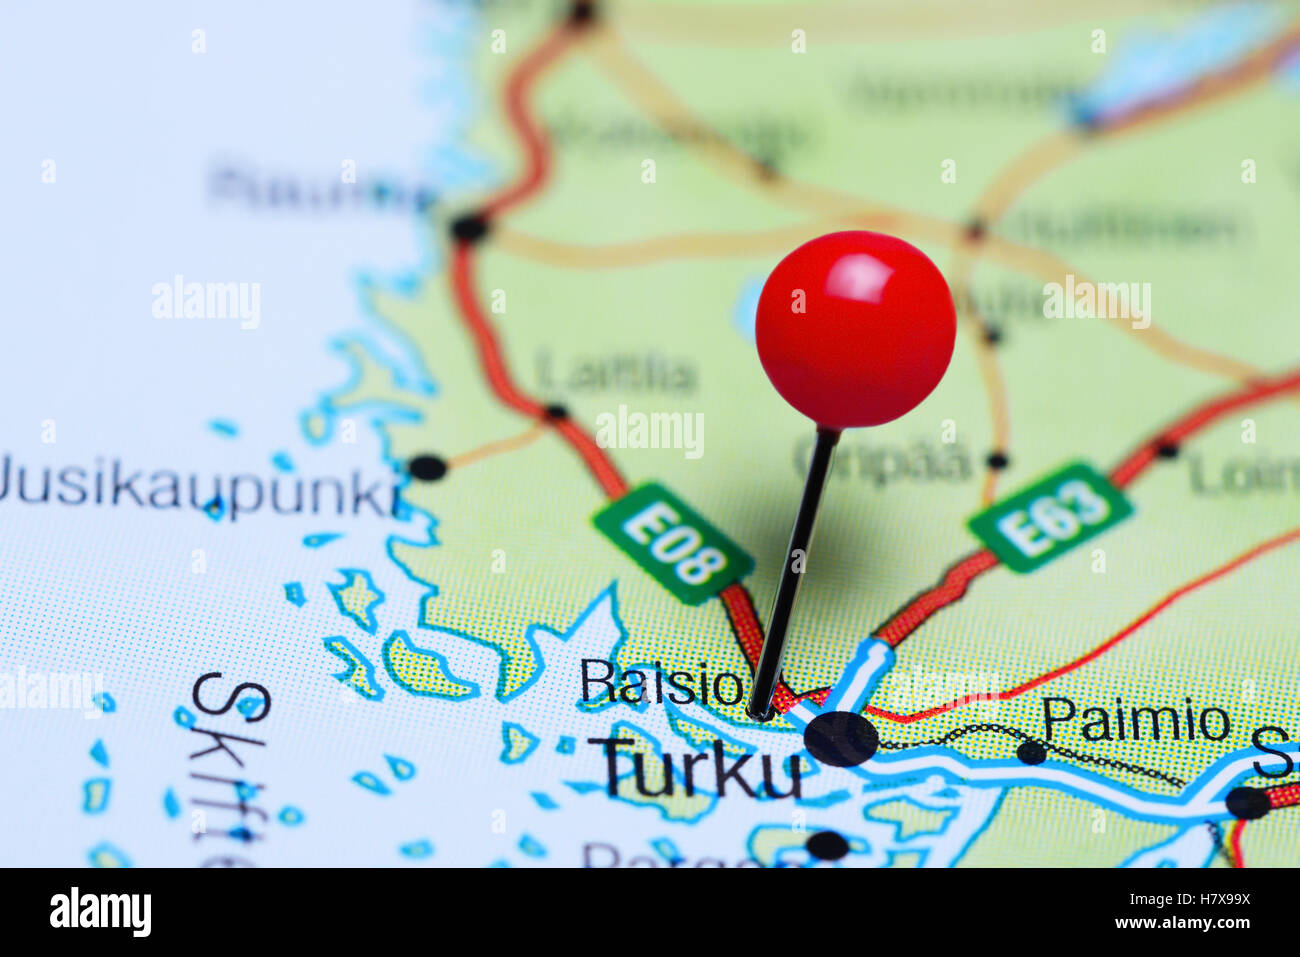 Raisio pinned on a map of Finland Stock Photo